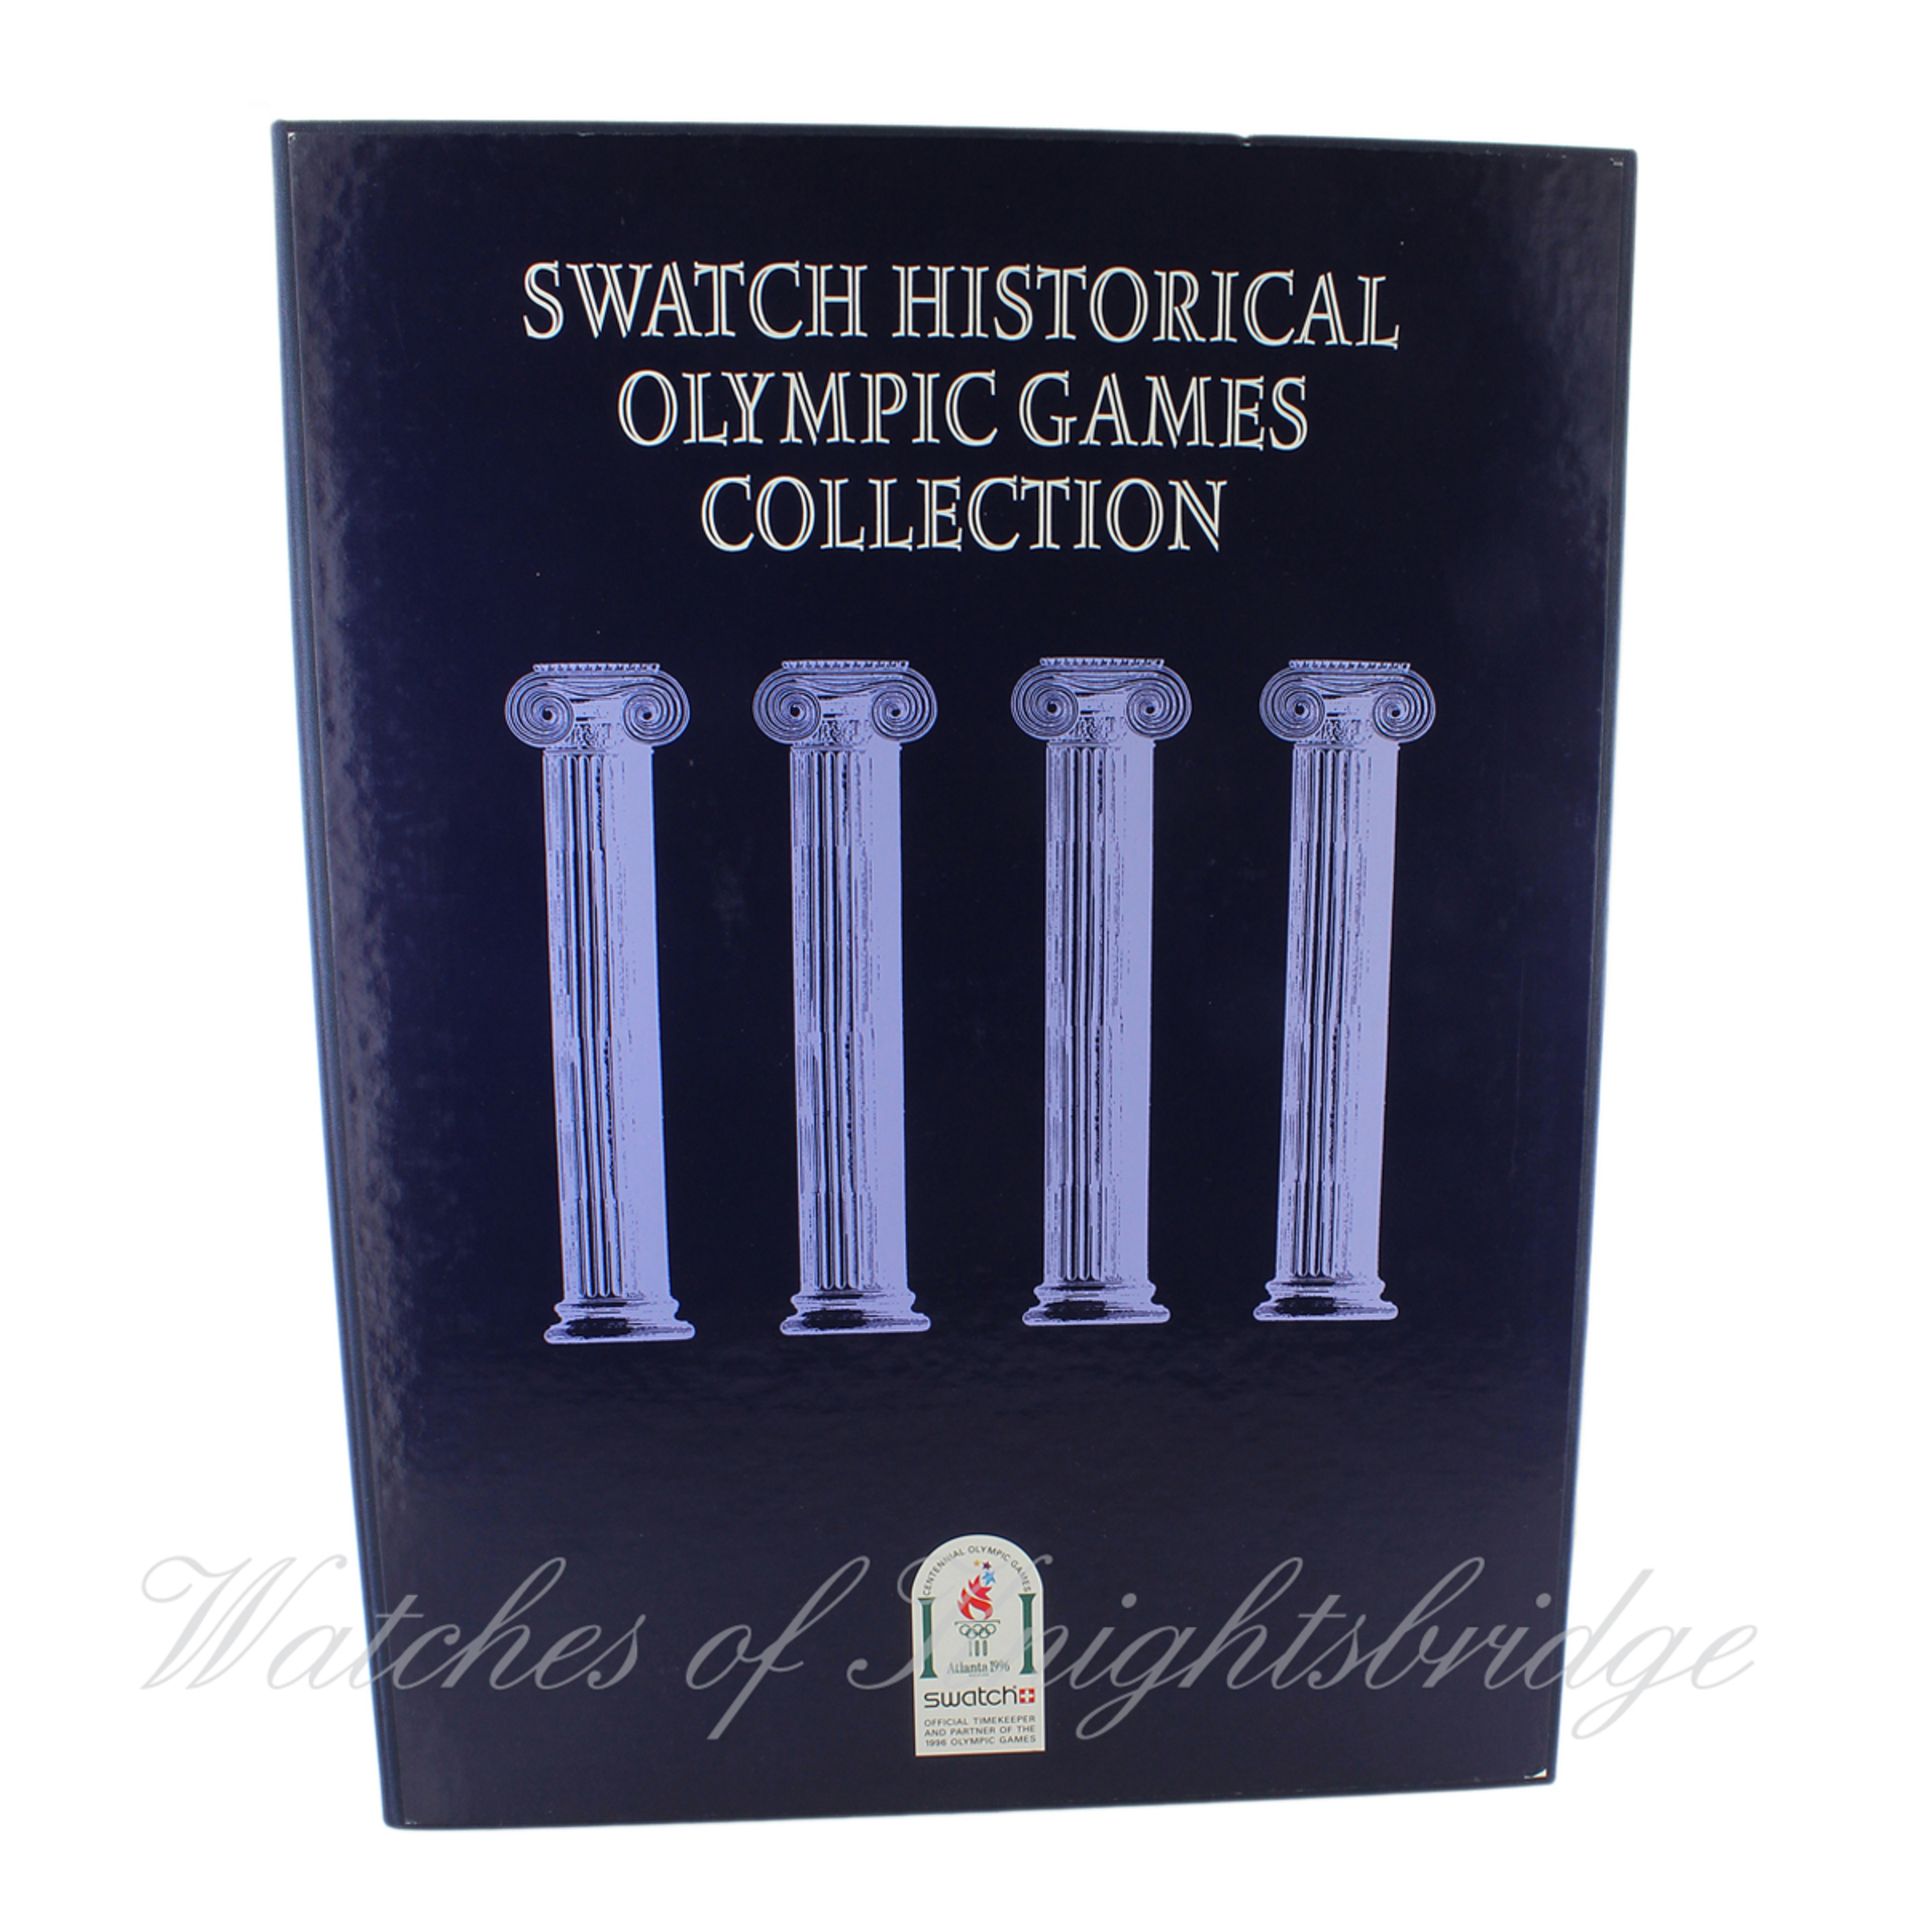 A LIMITED EDITION SWATCH HISTORICAL OLYMPIC GAMES COLLECTION BOX SET CIRCA 1990s Includes nine